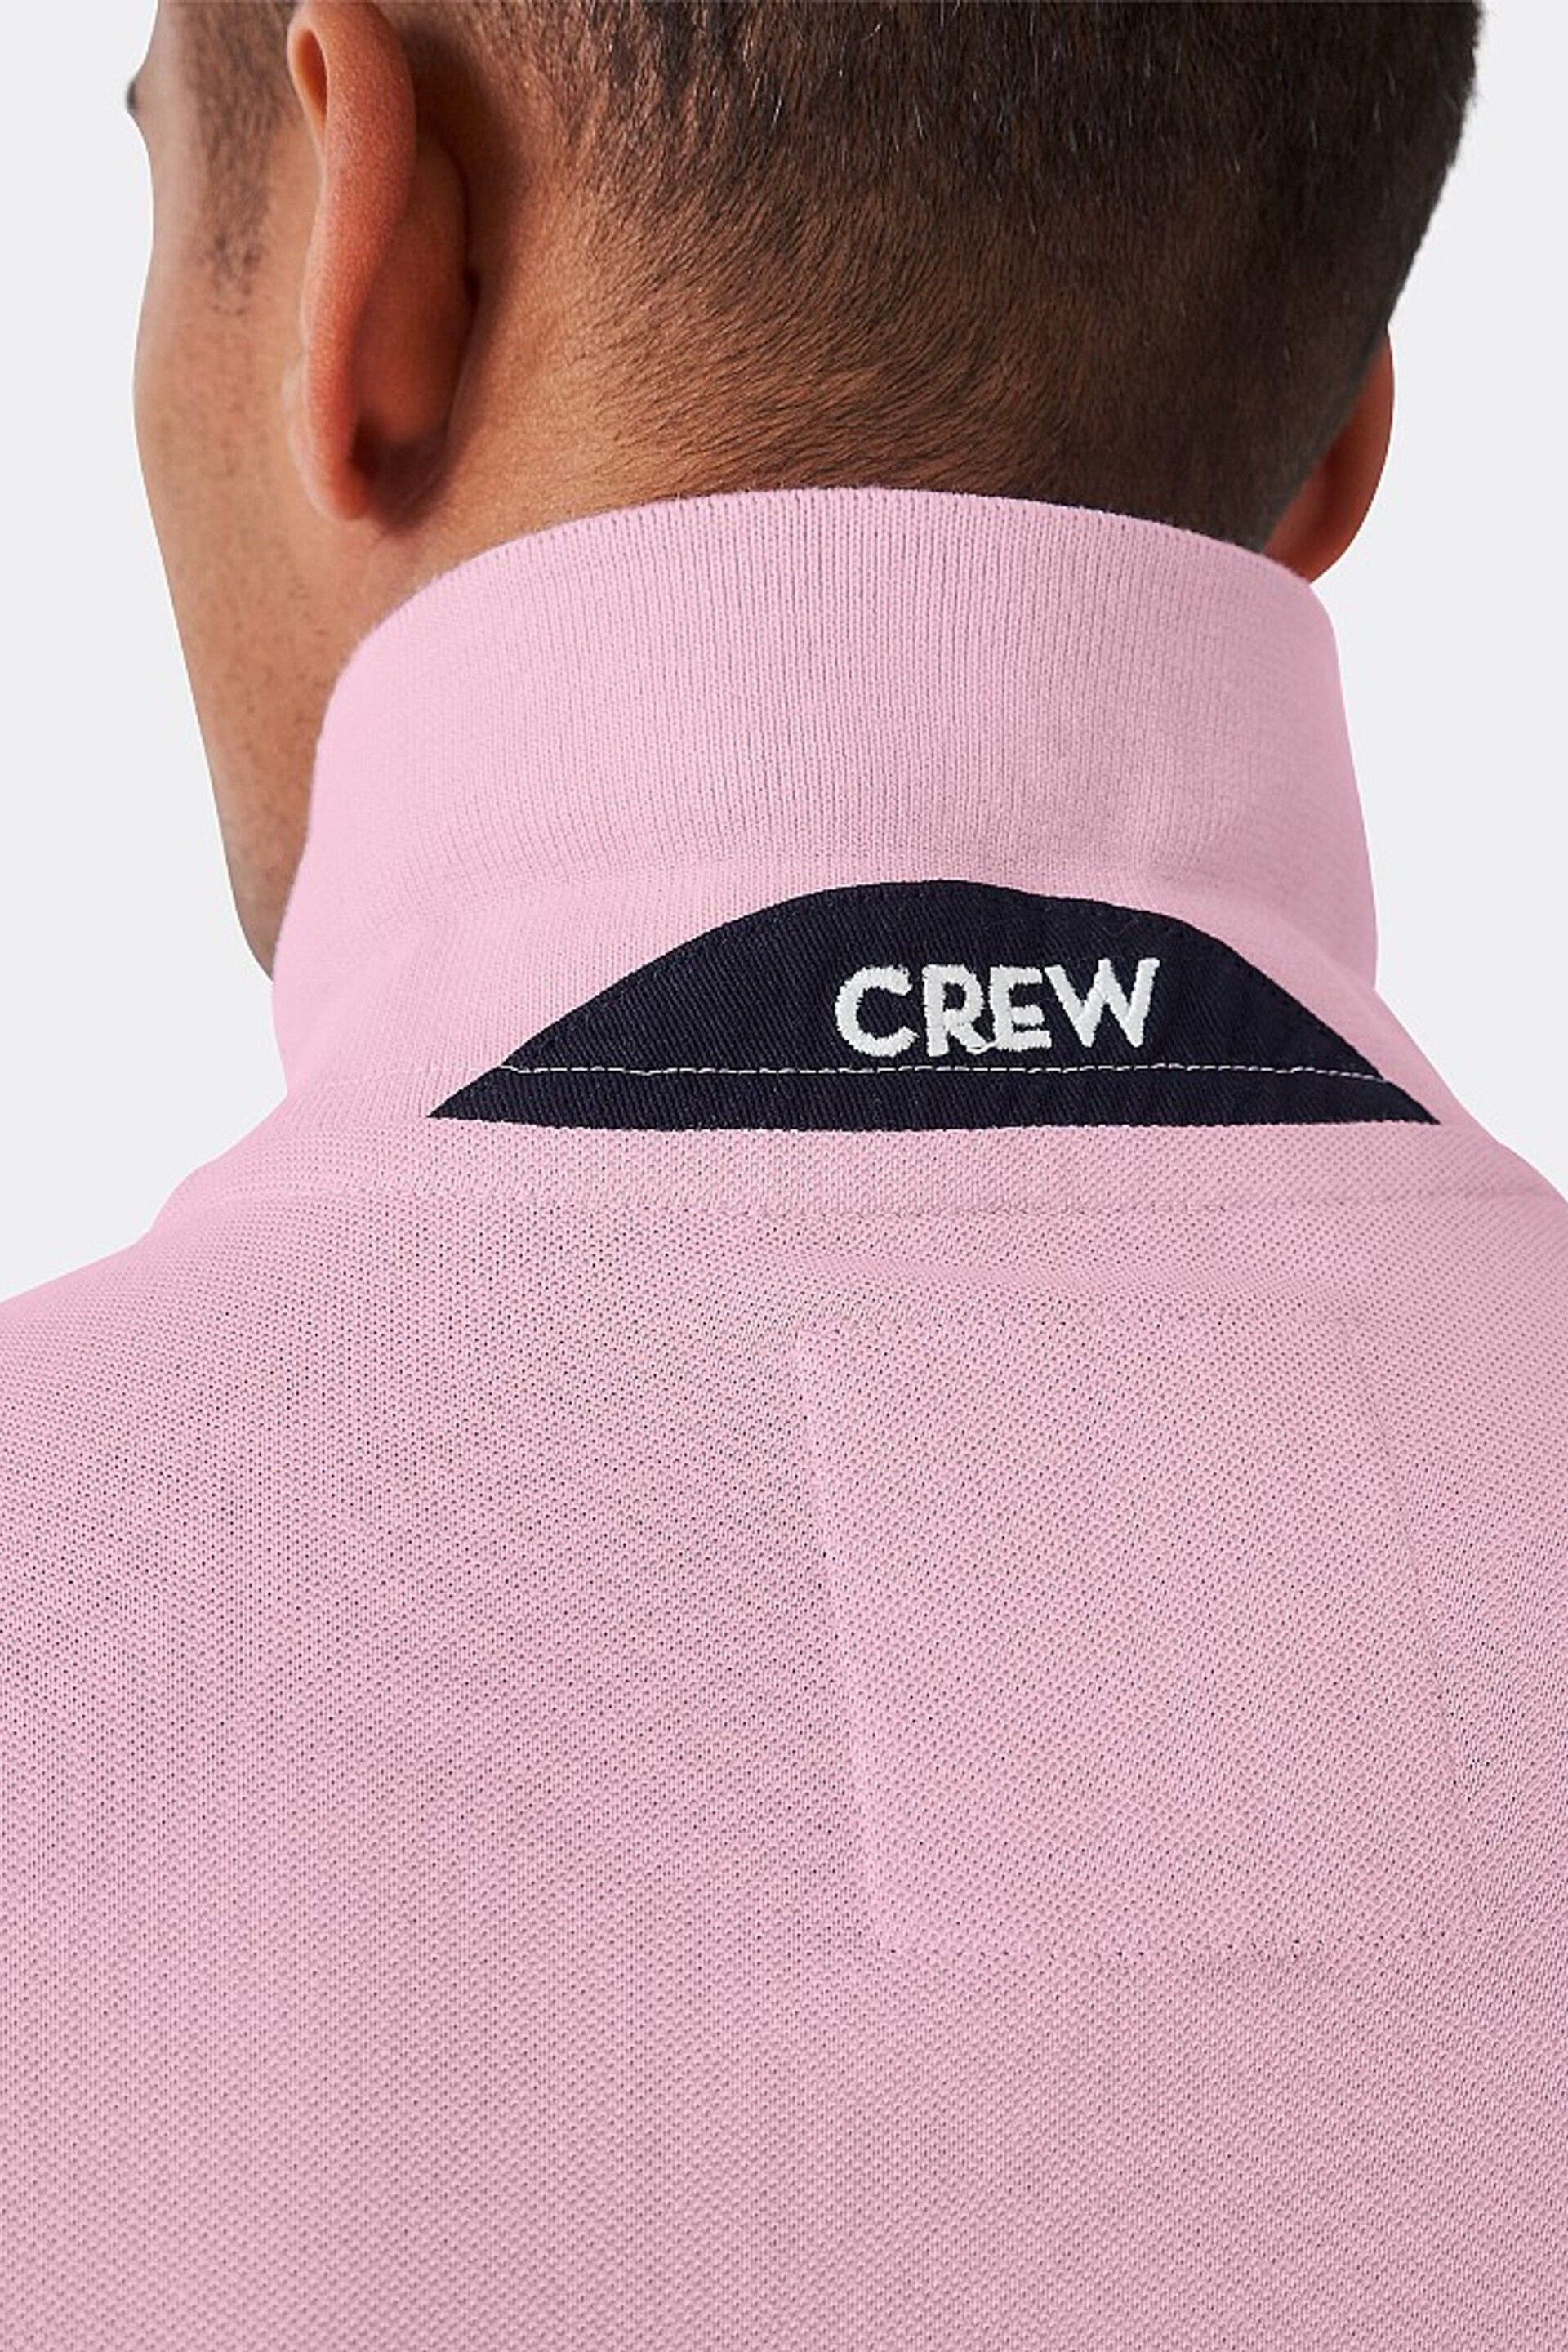 Crew Clothing Classic Pique Polo Shirt - Image 4 of 5